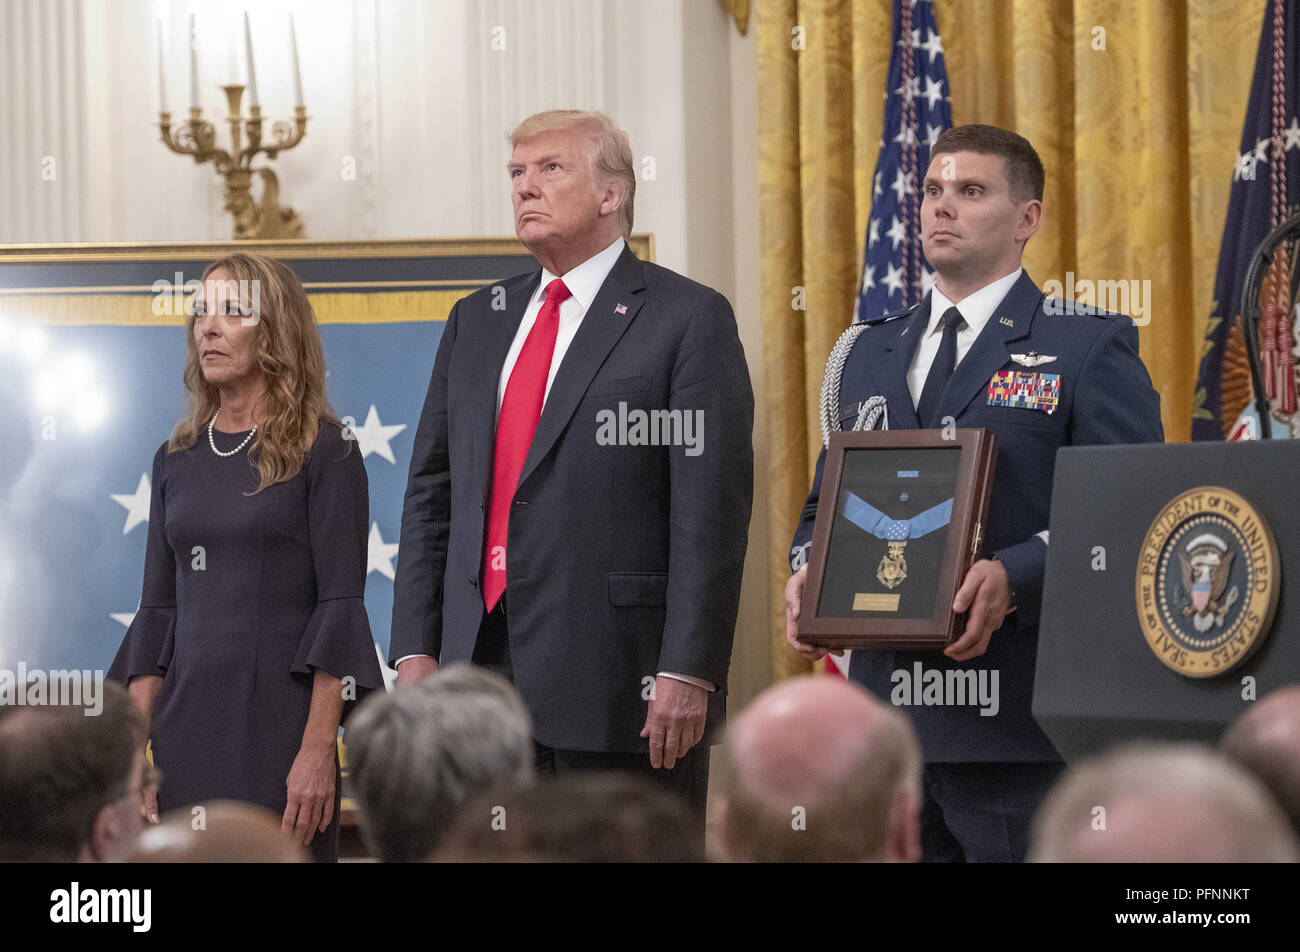 Washington, District of Columbia, USA. 22nd Aug, 2018. Valerie Nessel, widow of Technical Sergeant John A. Chapman, United States Air Force, left, stands with US President Donald J. Trump, center, makes remarks as she accepts the Medal of Honor posthumously from the President during a ceremony in the East Room of the White House in Washington, DC on Wednesday, August 22, 2018. Sergeant Chapman is being honored for his actions on March 4, 2002, on Takur Ghar mountain in Afghanistan where he gave his life to save his teammates Credit: Ron Sachs/CNP/ZUMA Wire/Alamy Live News Stock Photo